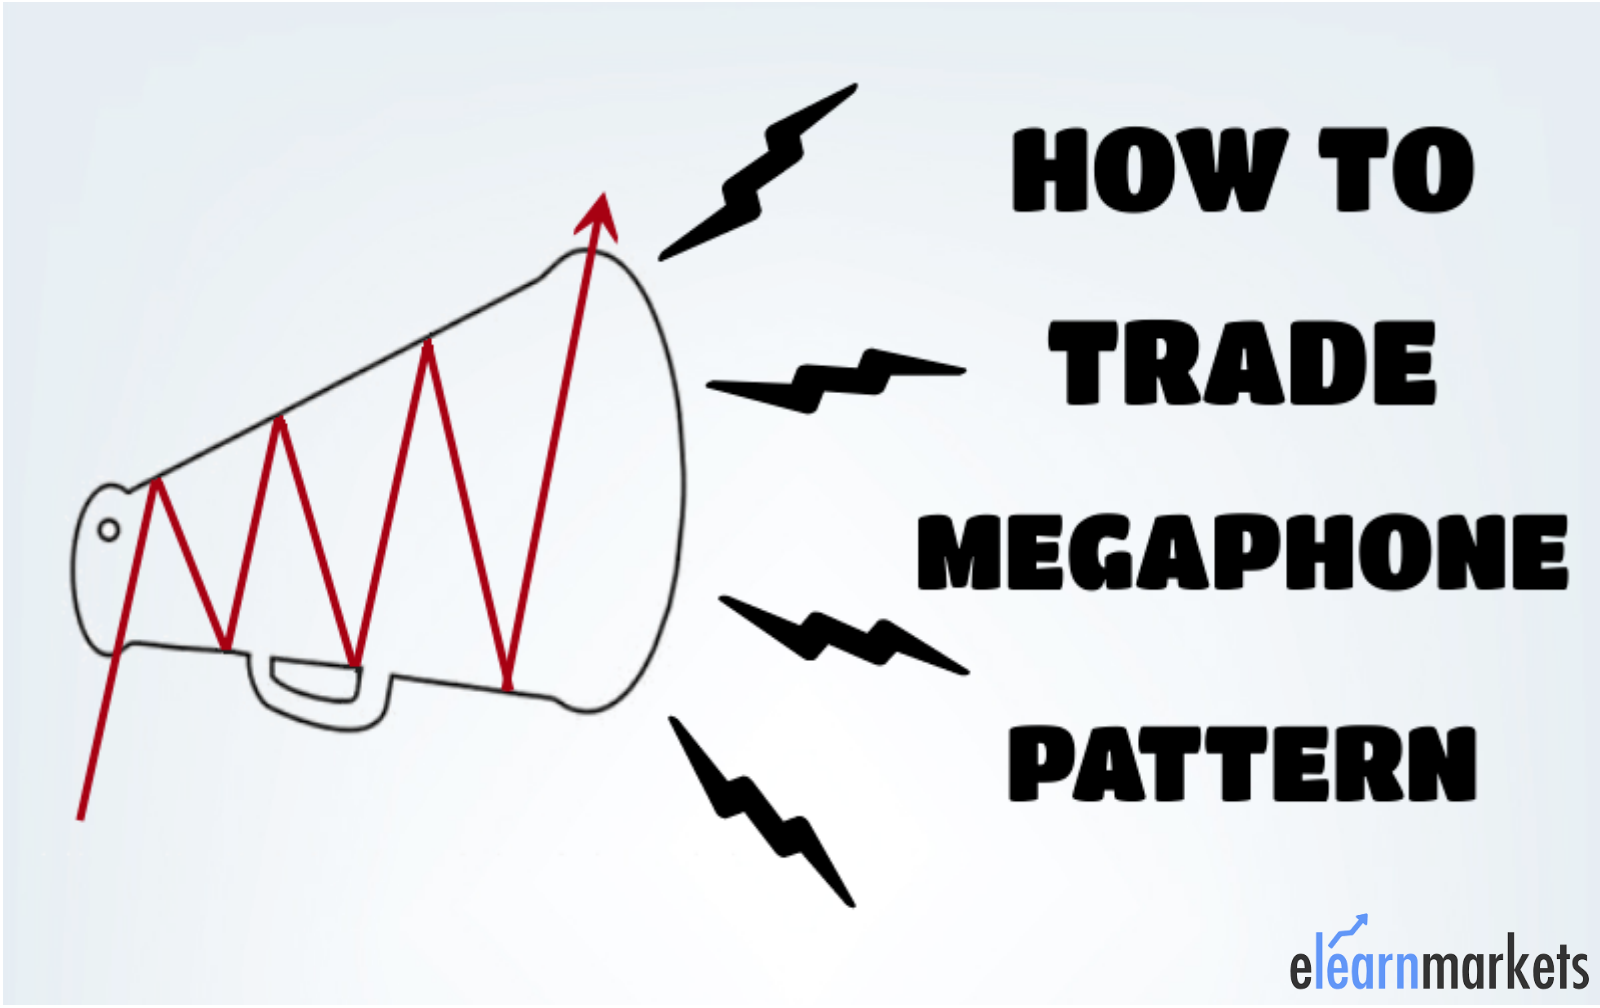 How to trade Megaphone Pattern